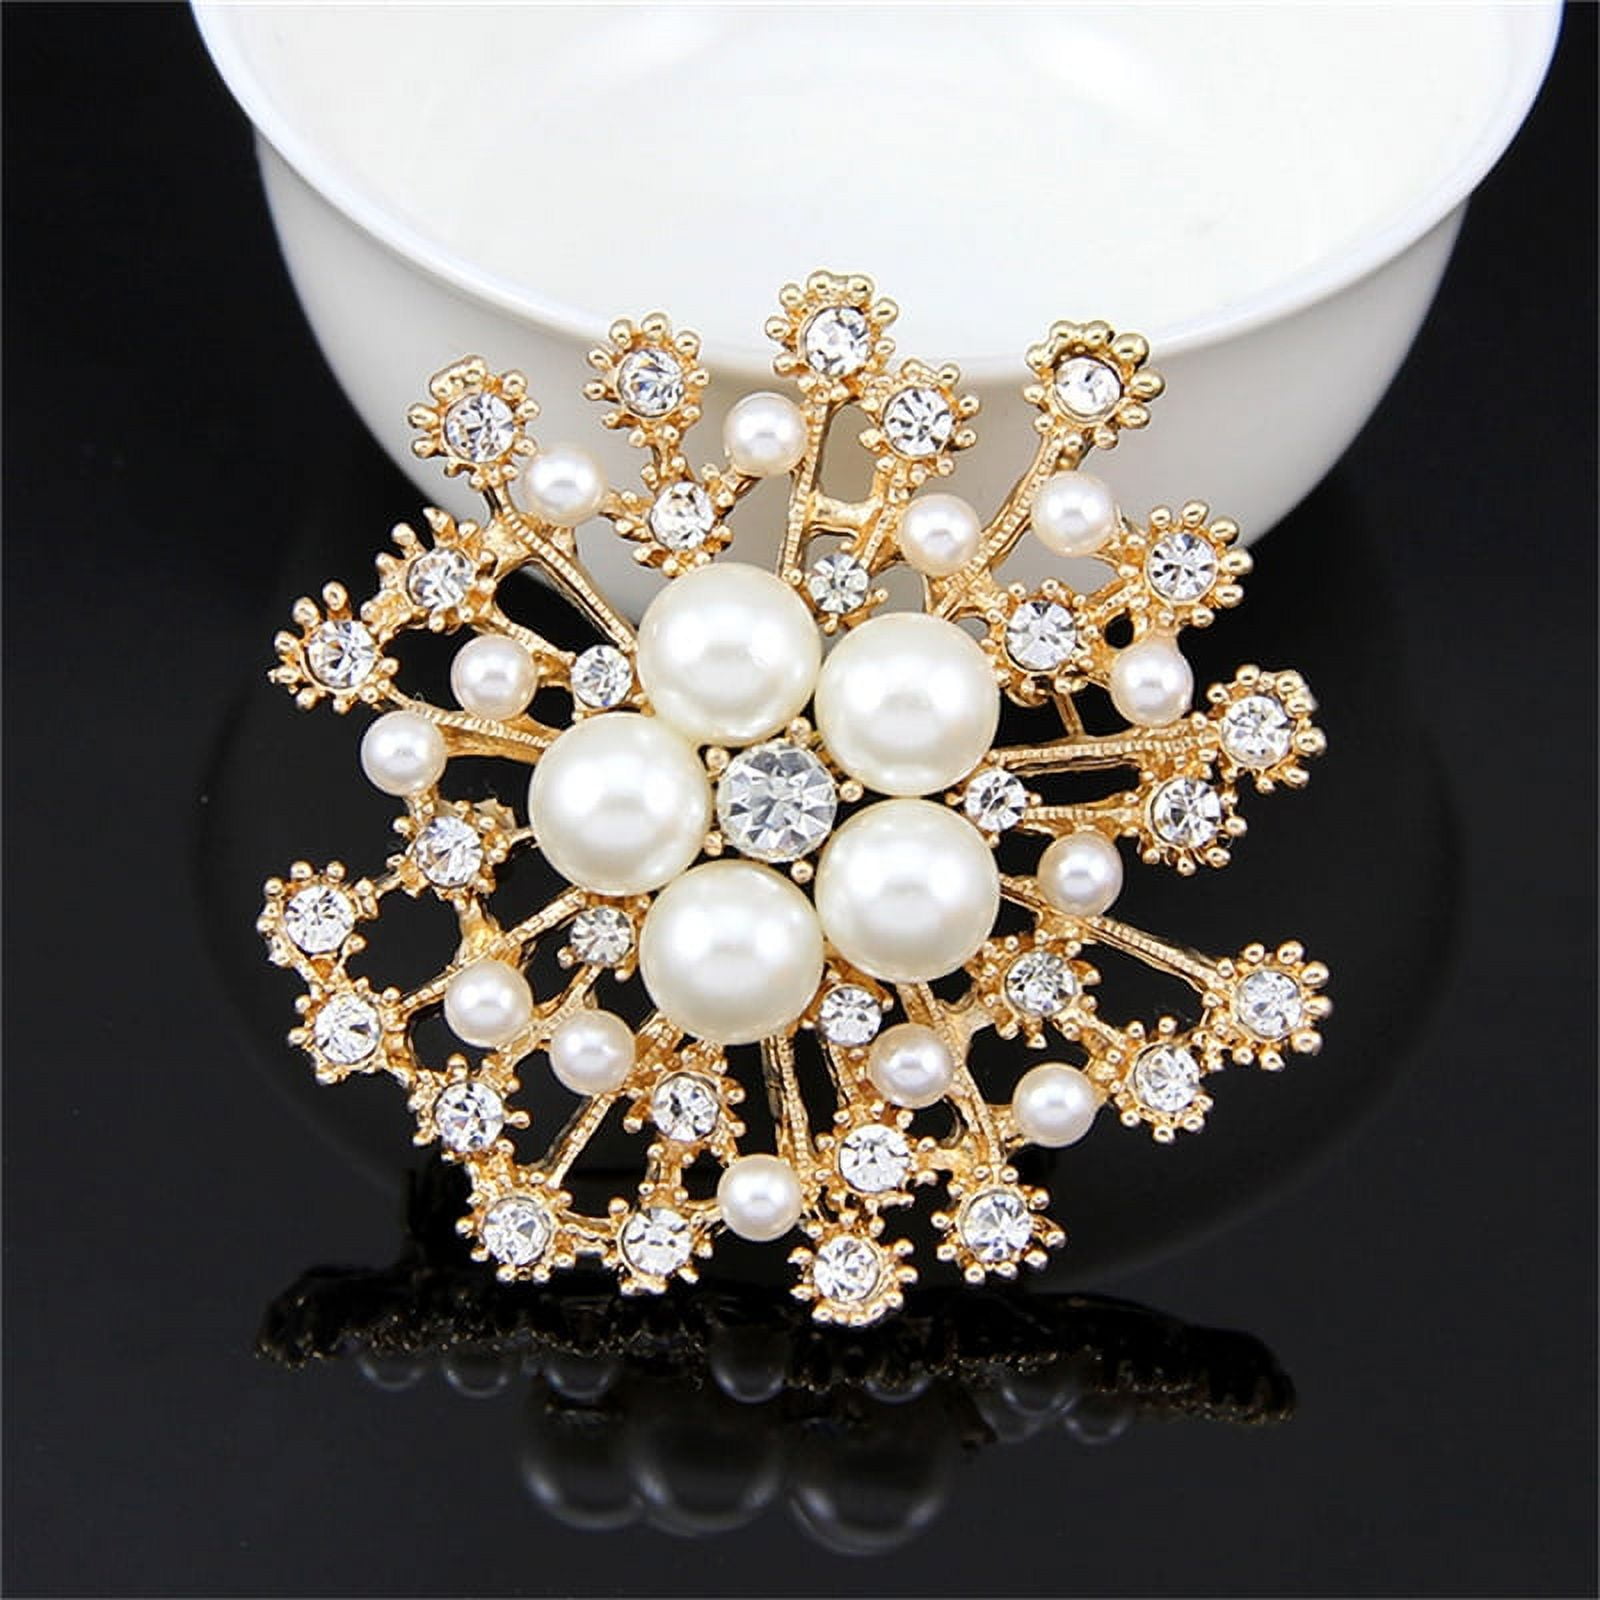 ROFARSO Gold Vintage Brooch Pin for Women Fully-Jewelled with Faux Pearl&  Rhinestone Crystal for Wedding Party Prom Gift Rococo Style Lapel Pin